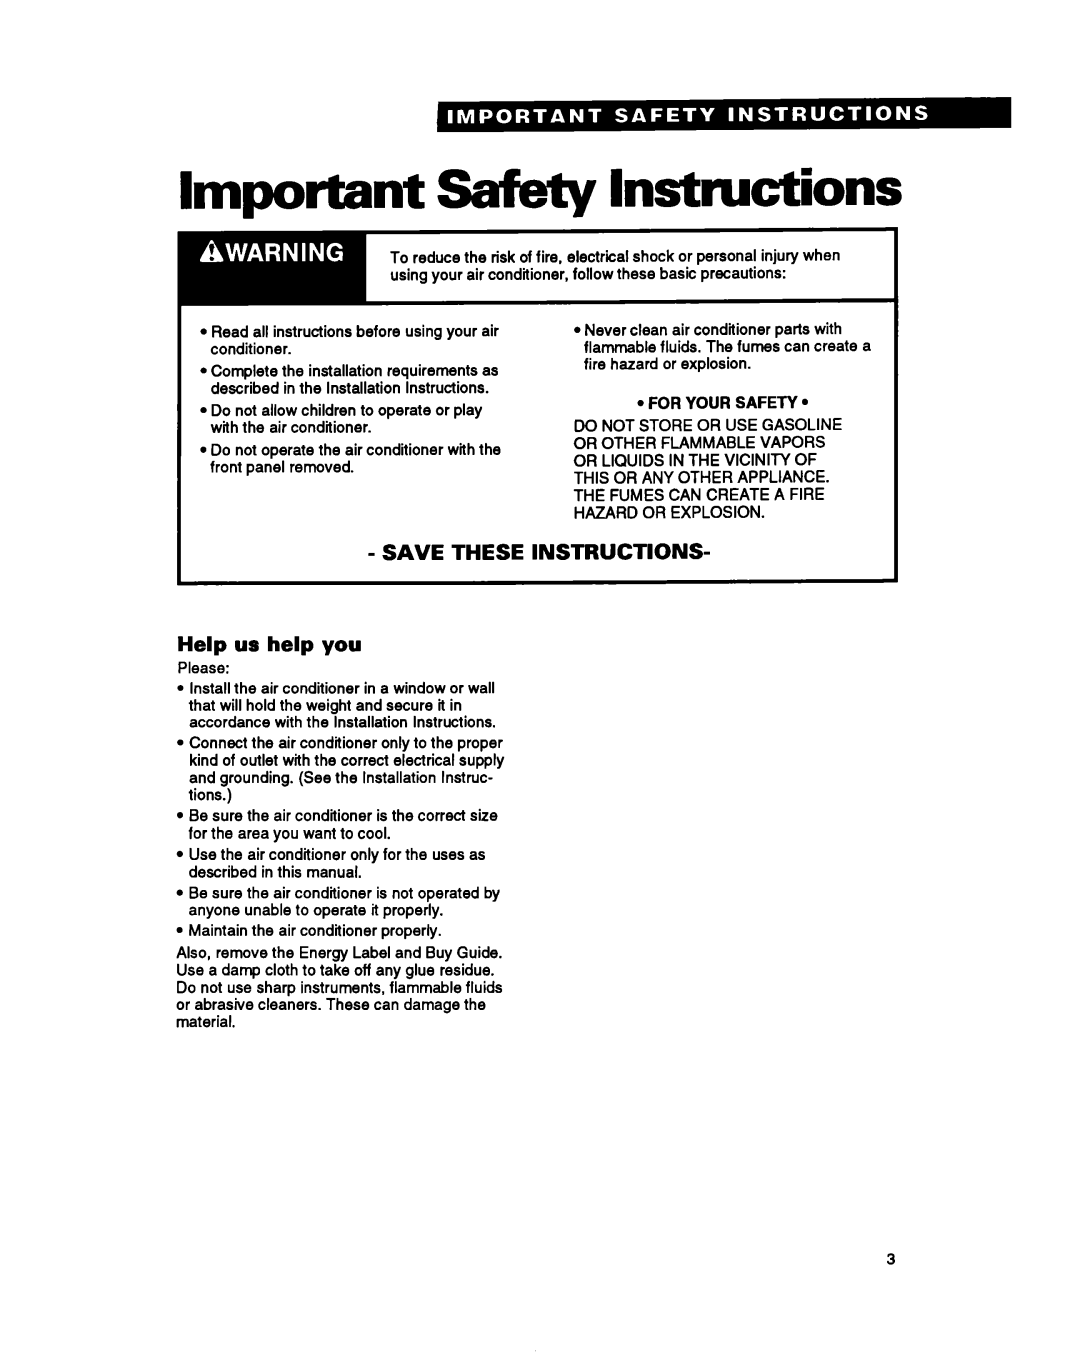 Whirlpool ACXO82XZO warranty Important Safety Instructions, Save These Instructions, Help us help you 